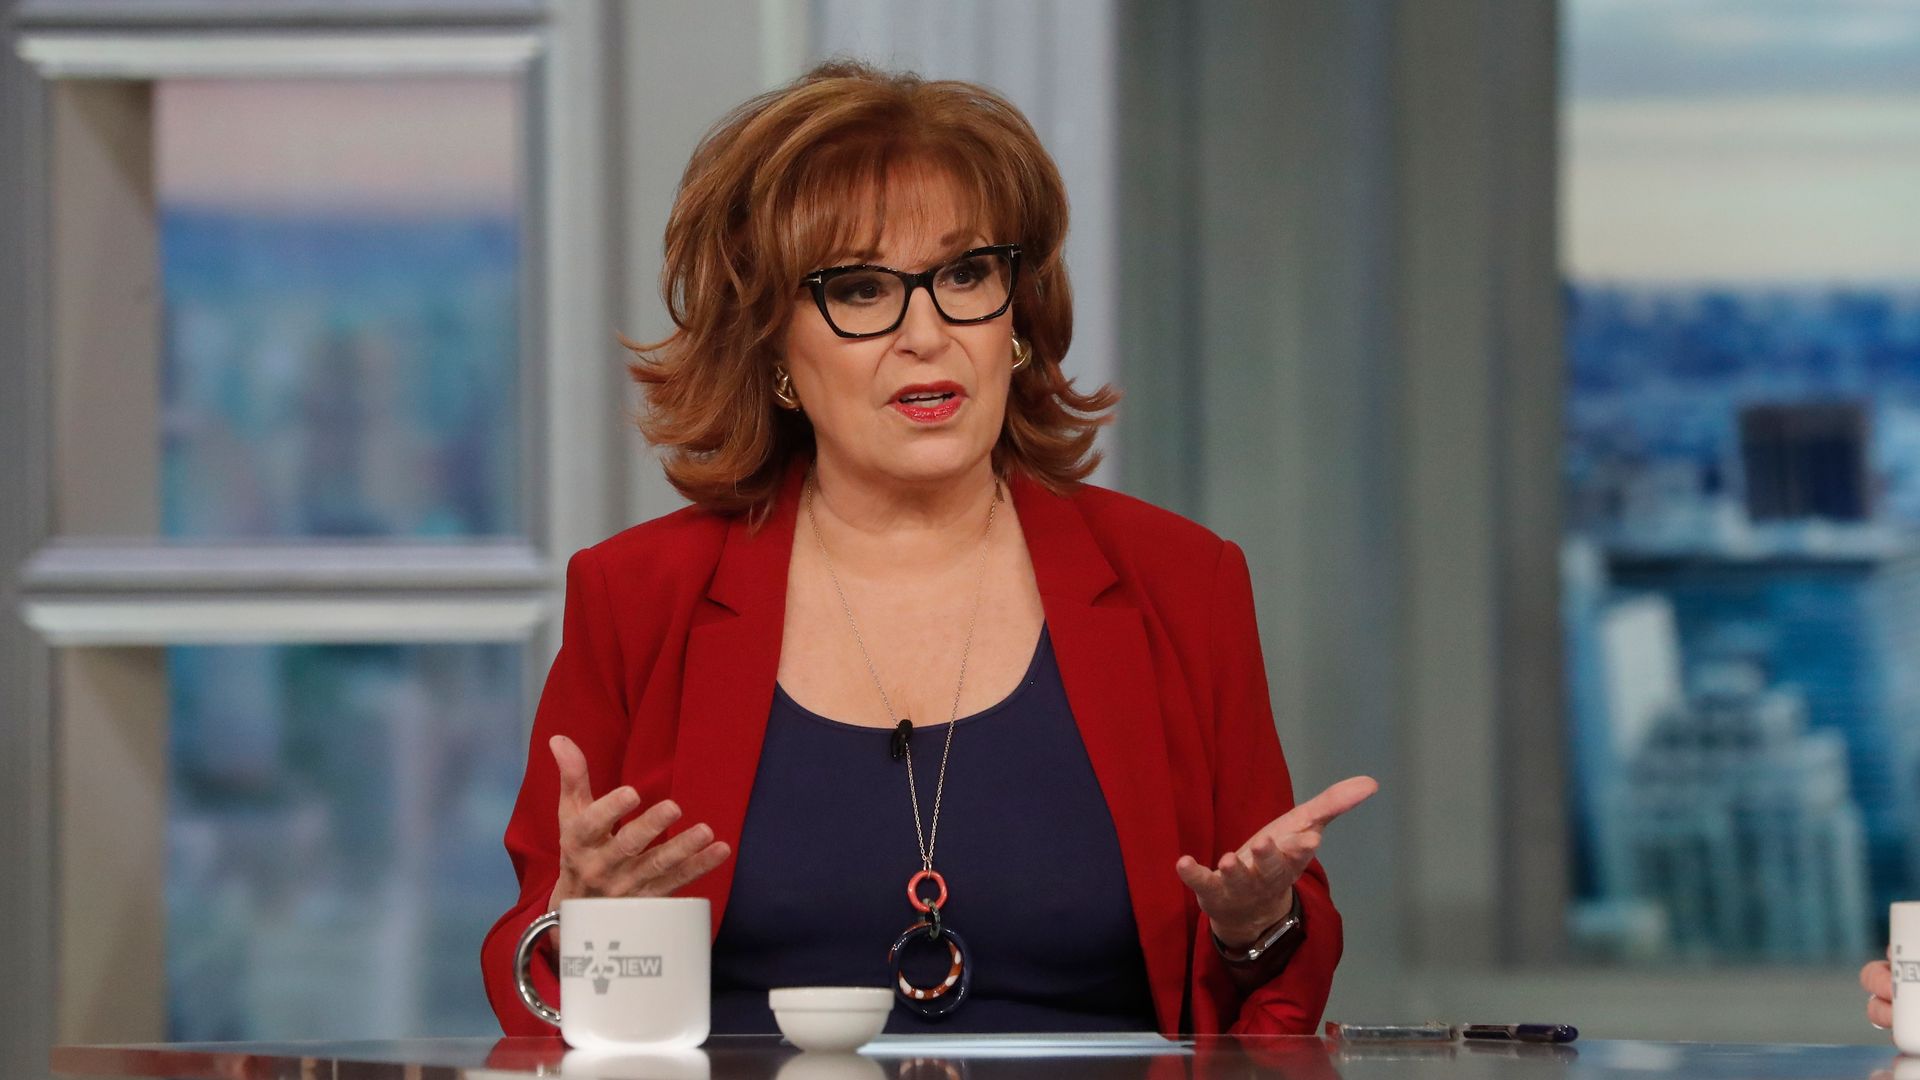 Joy Behar on The View on Friday, May 6, 2022